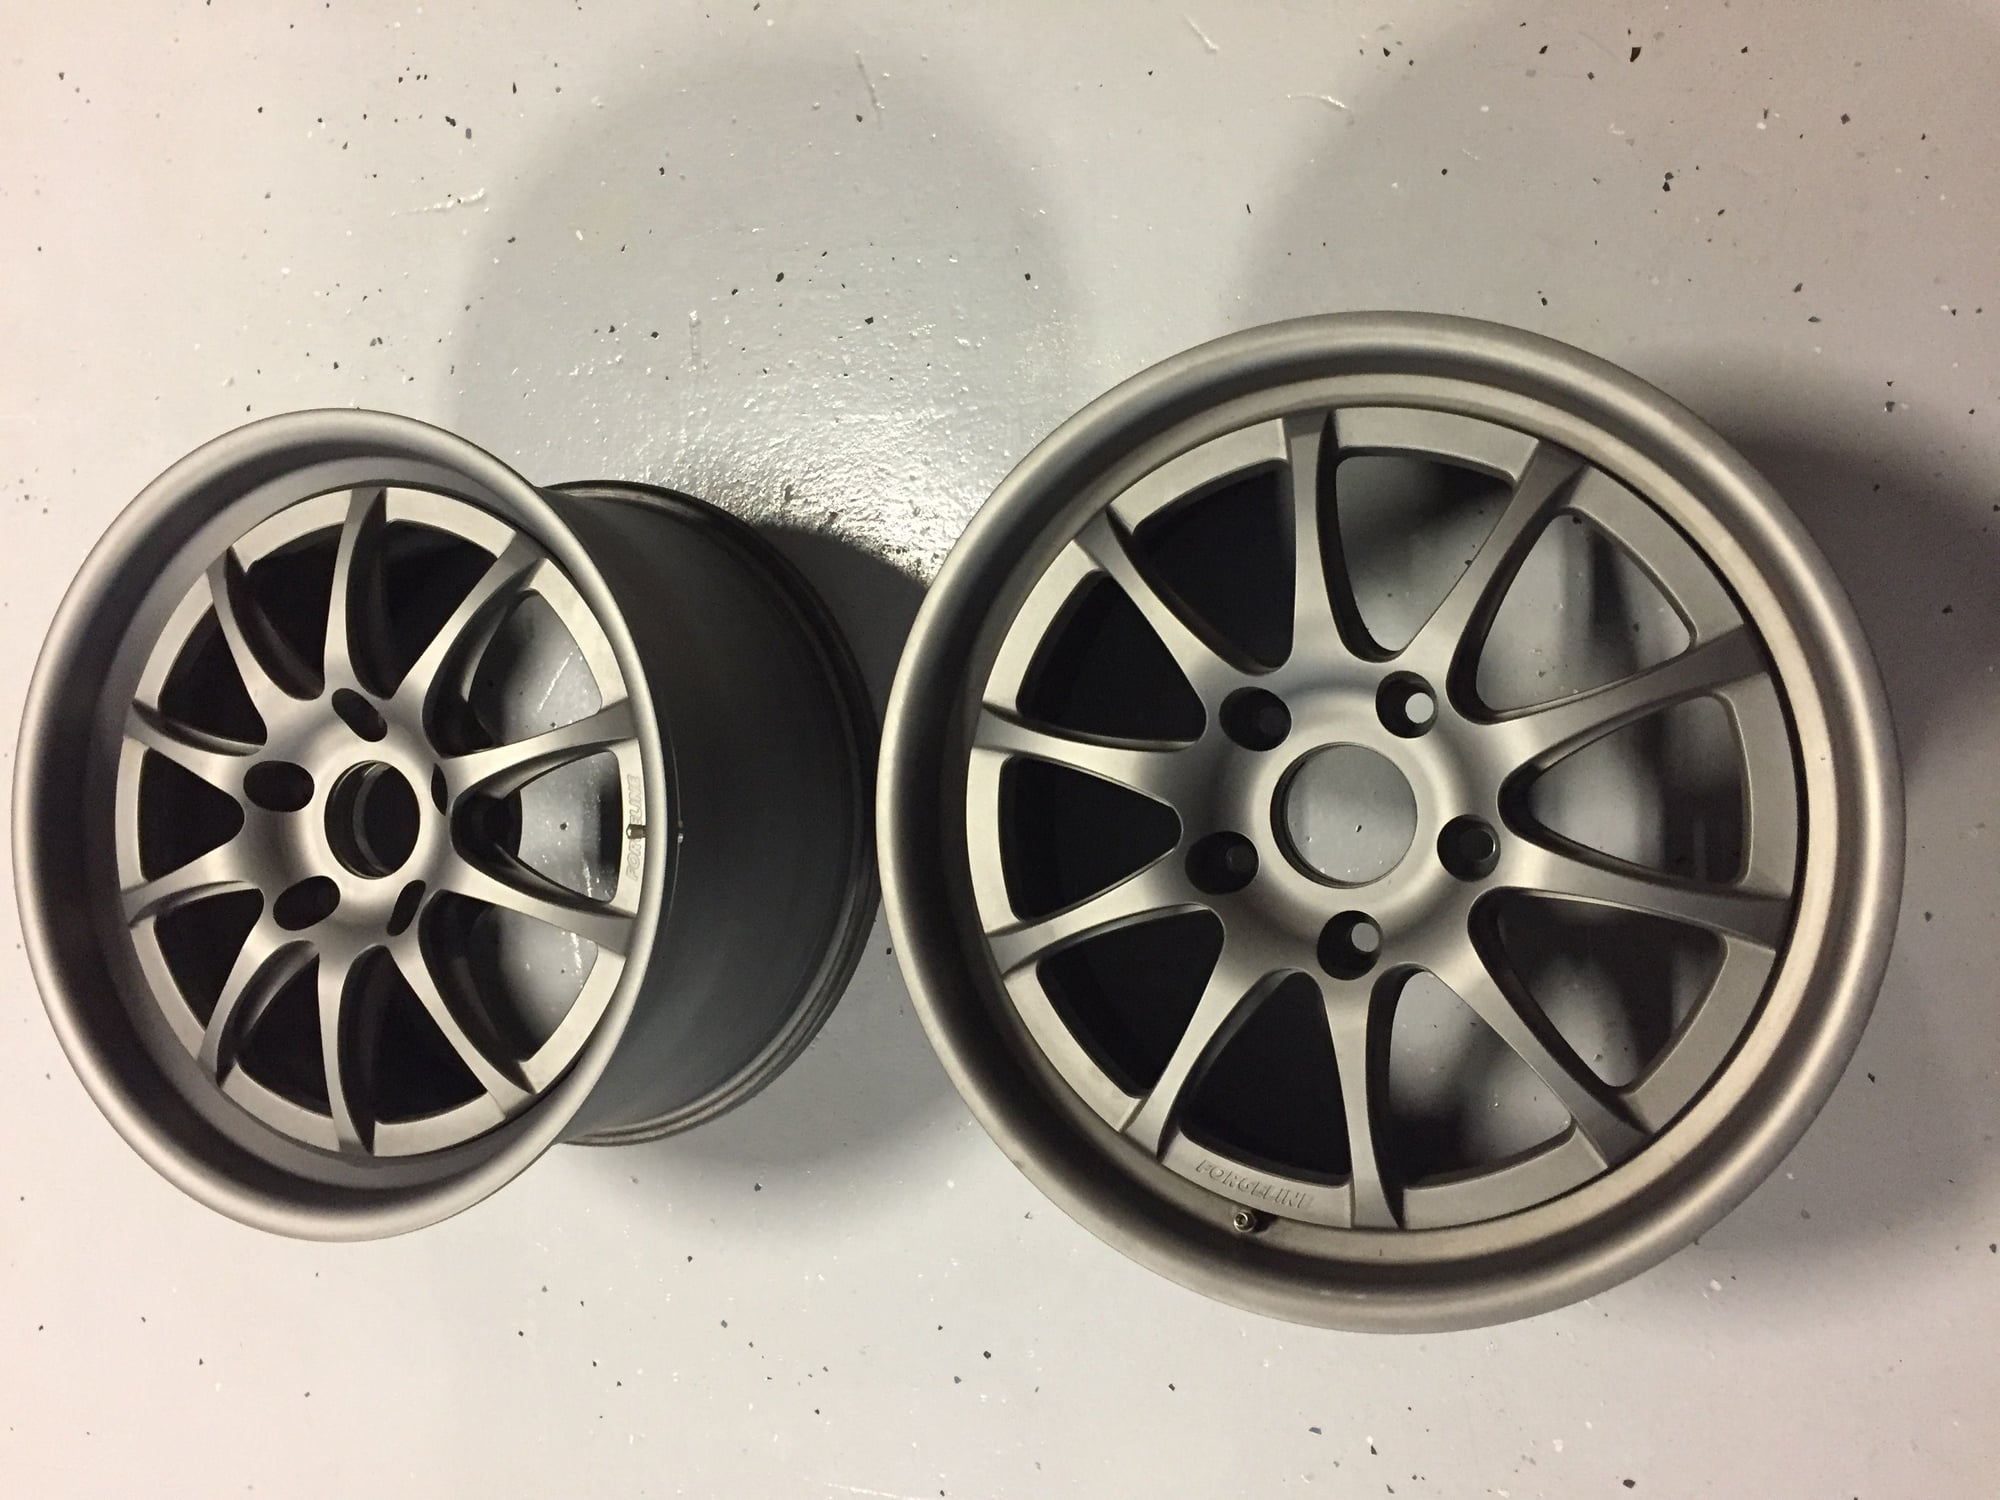 Wheels and Tires/Axles - ForgeLine Motorsports Wheels - Used - 1989 to 2005 Porsche All Models - Tampa, FL 33556, United States